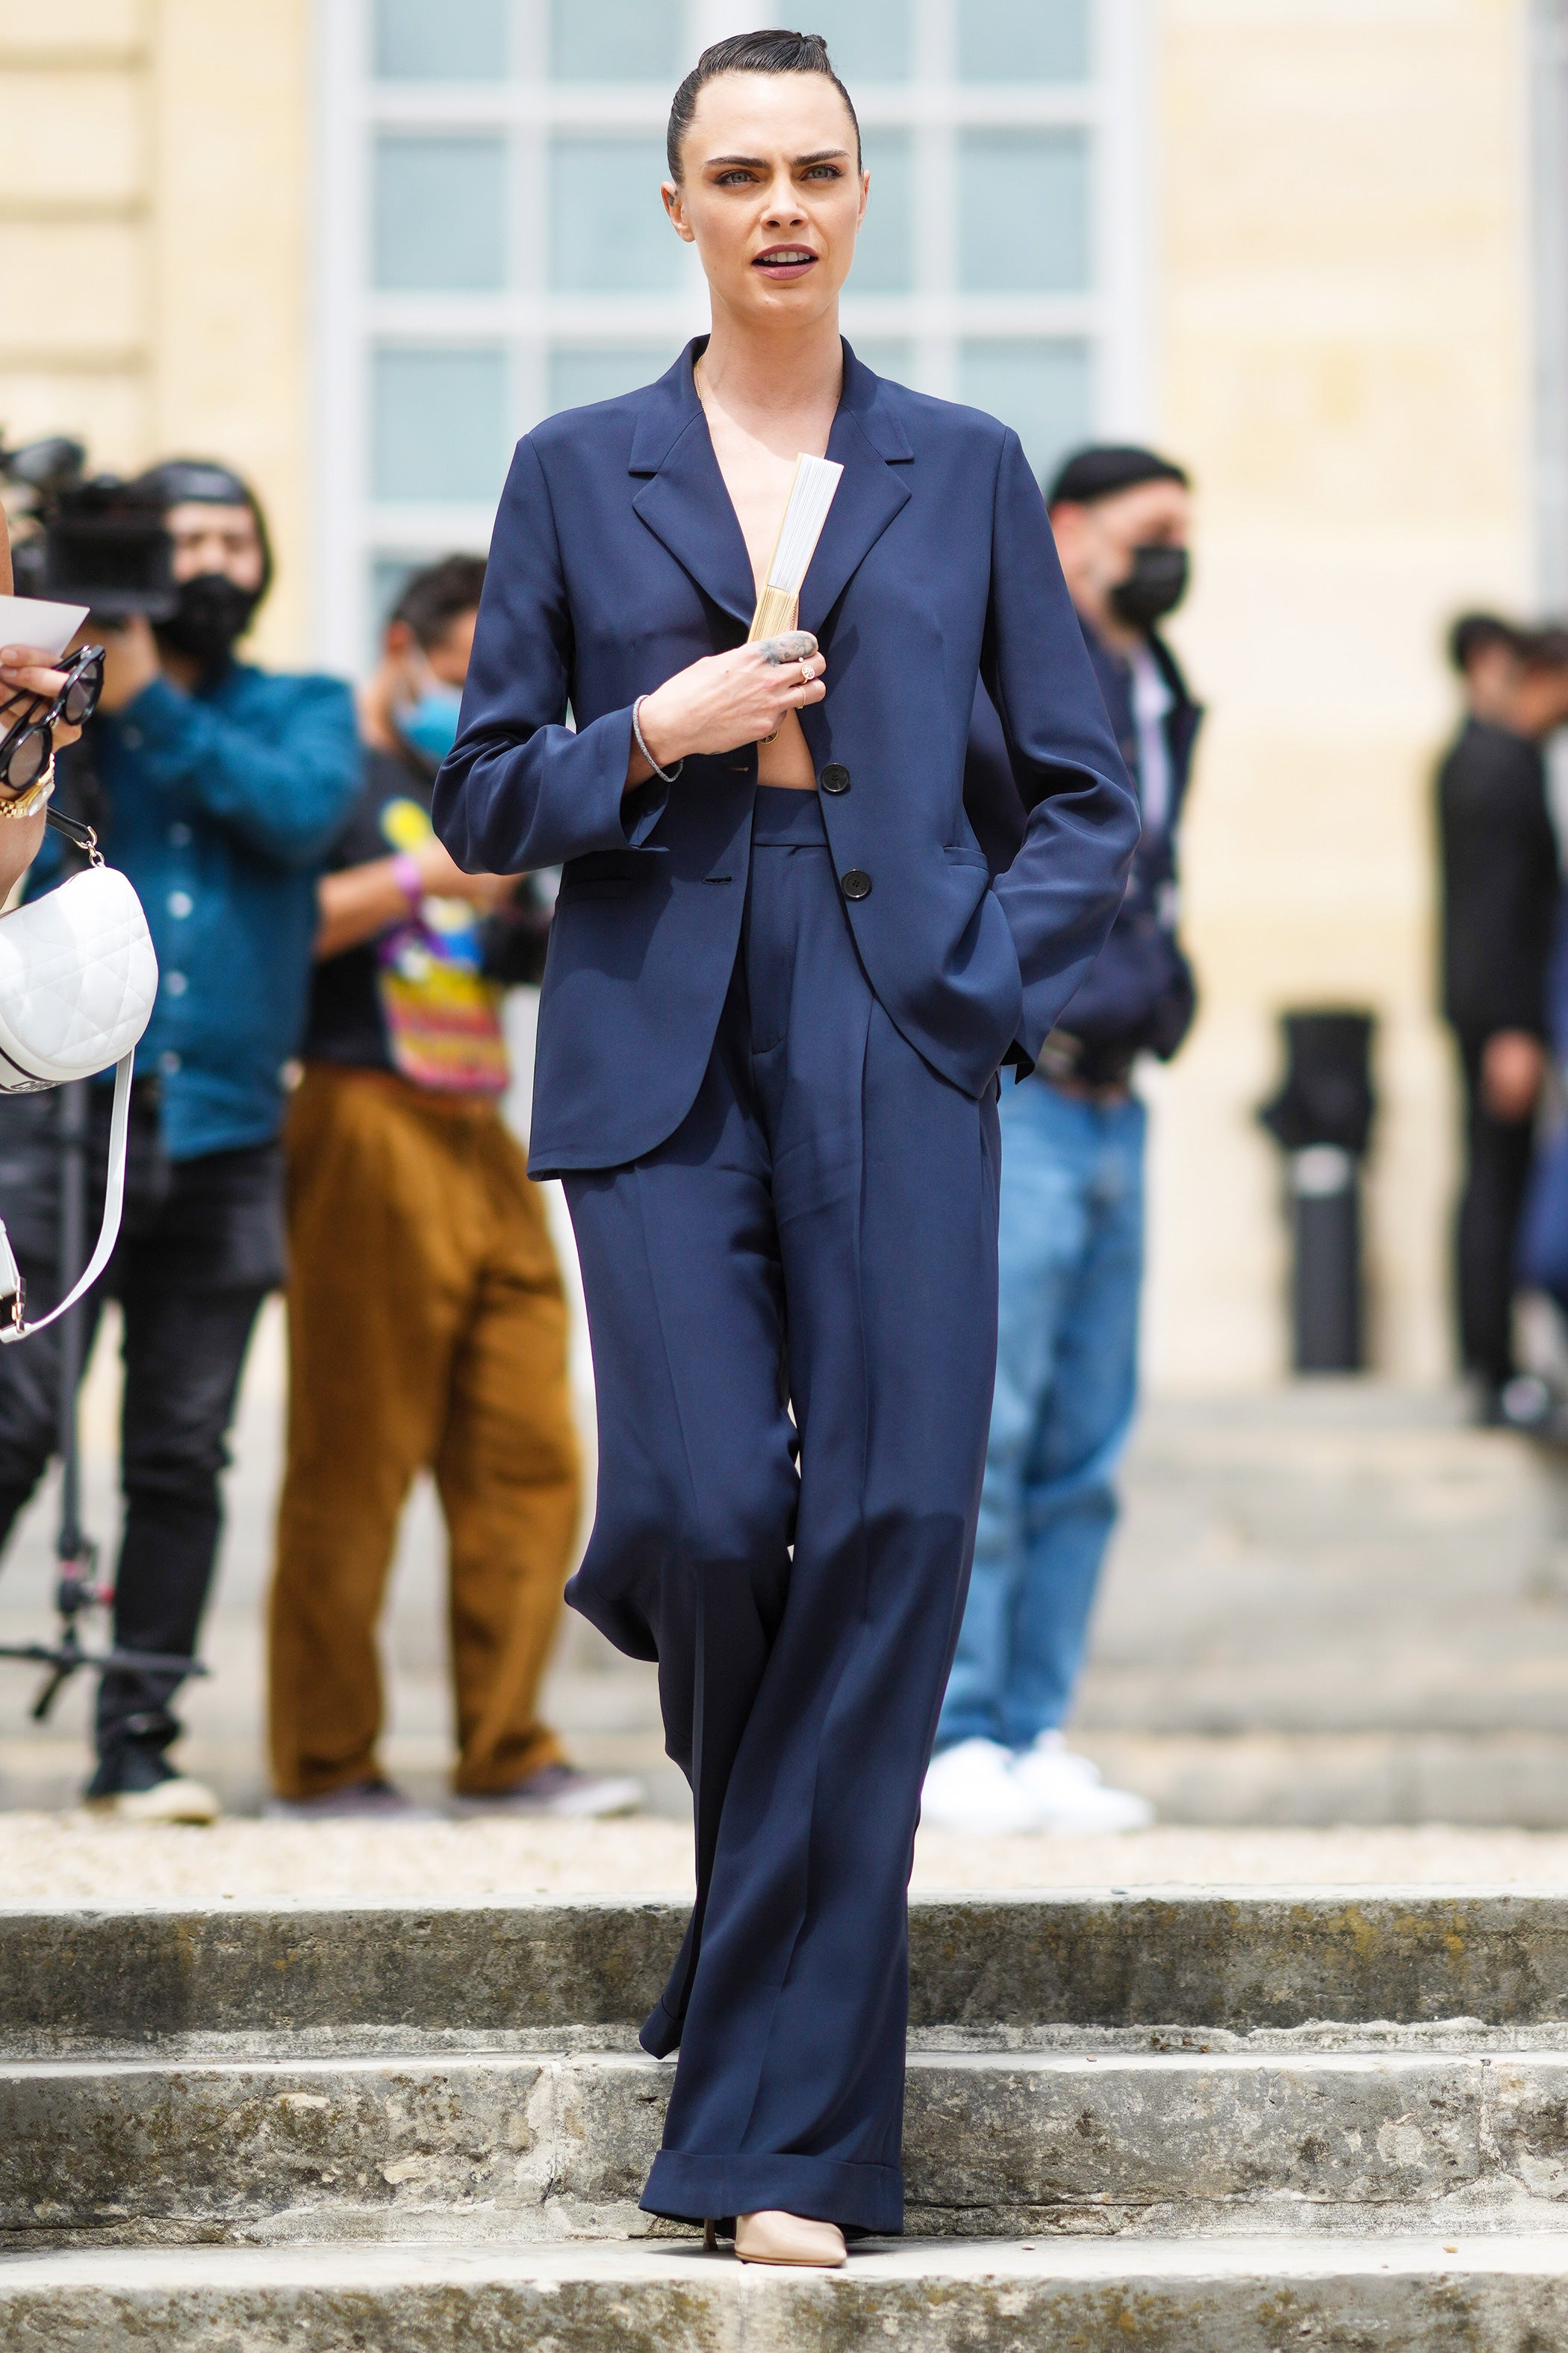 Menswear-Inspired Looks Are In At Paris Couture Week